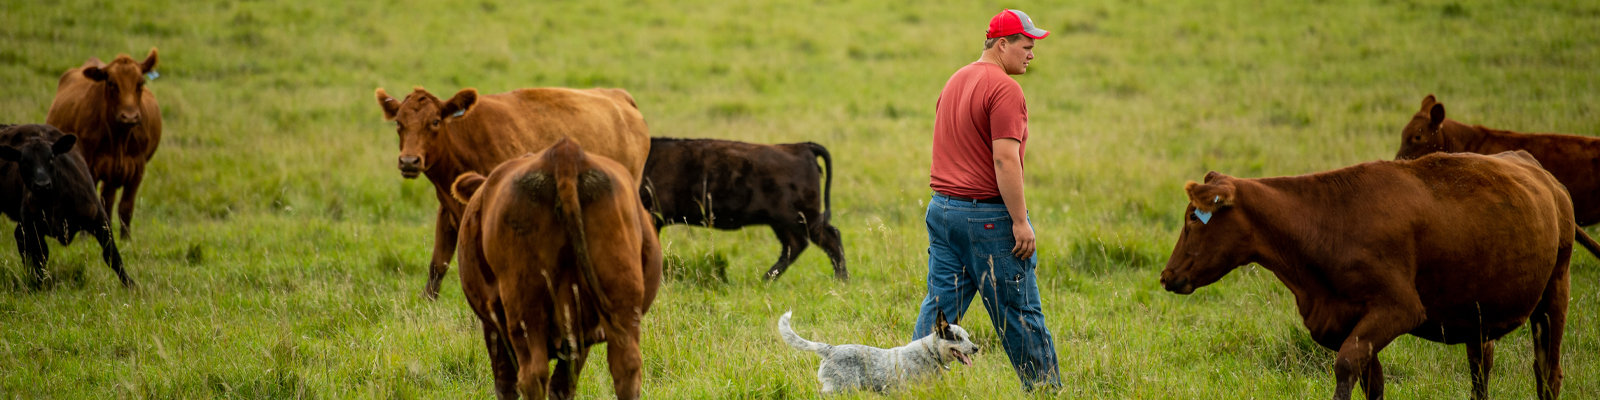 Farmer and dog in pasture with cattle